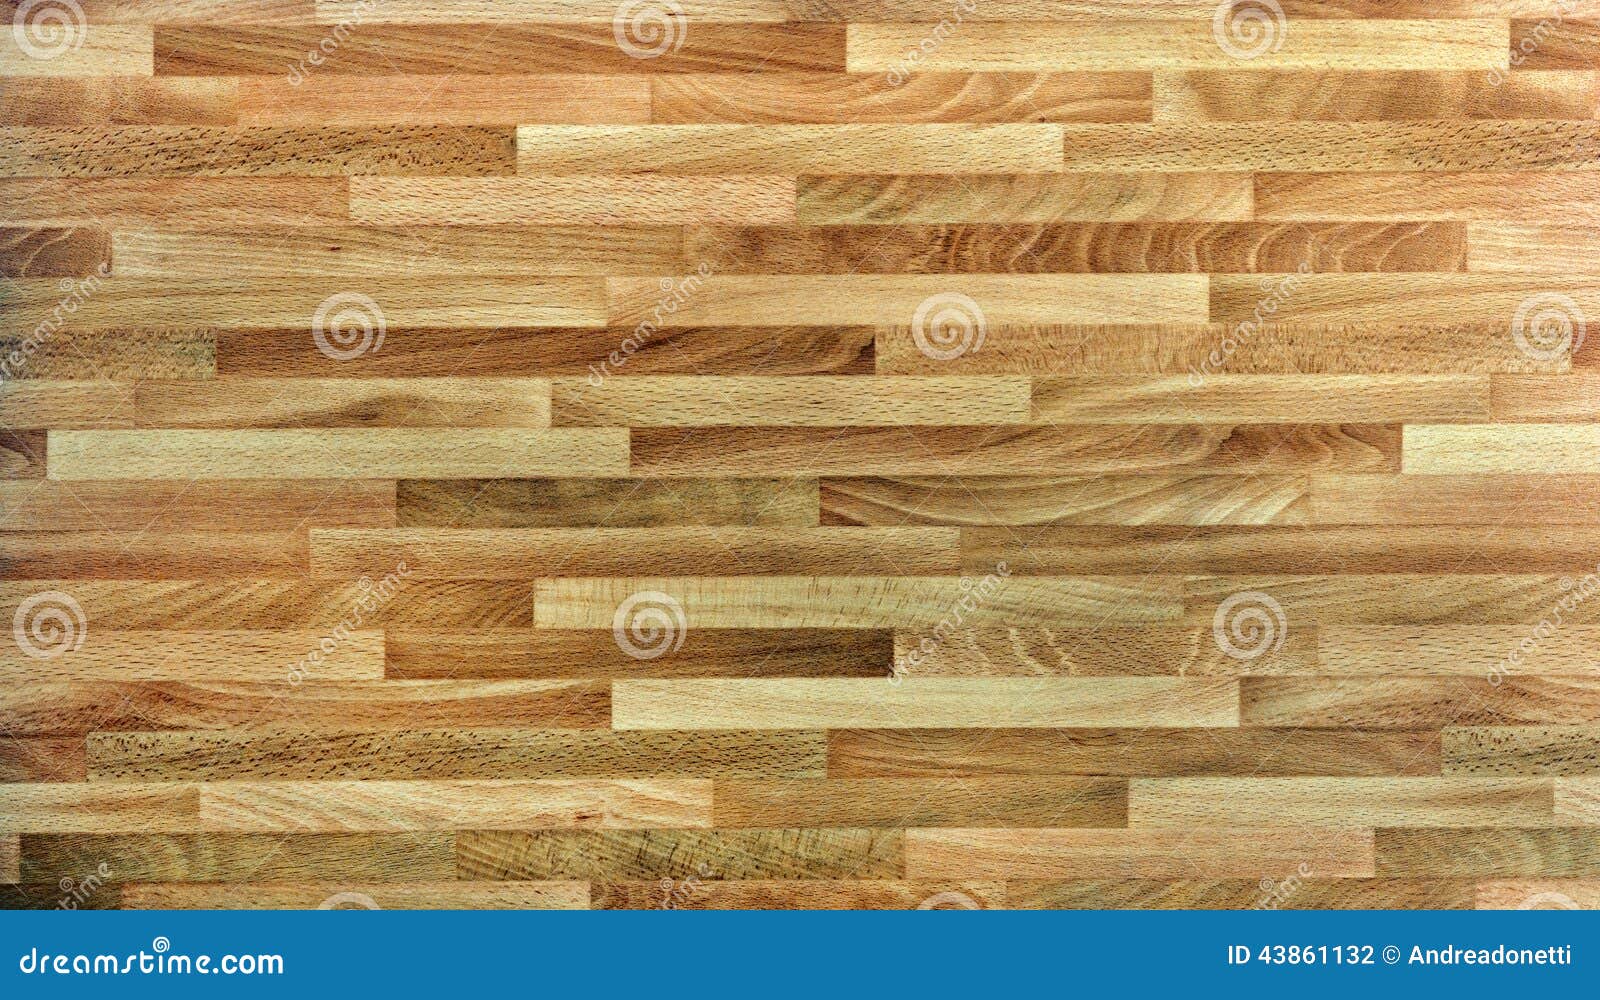 Background Texture And Pattern Of Wooden Boards Stock Photo